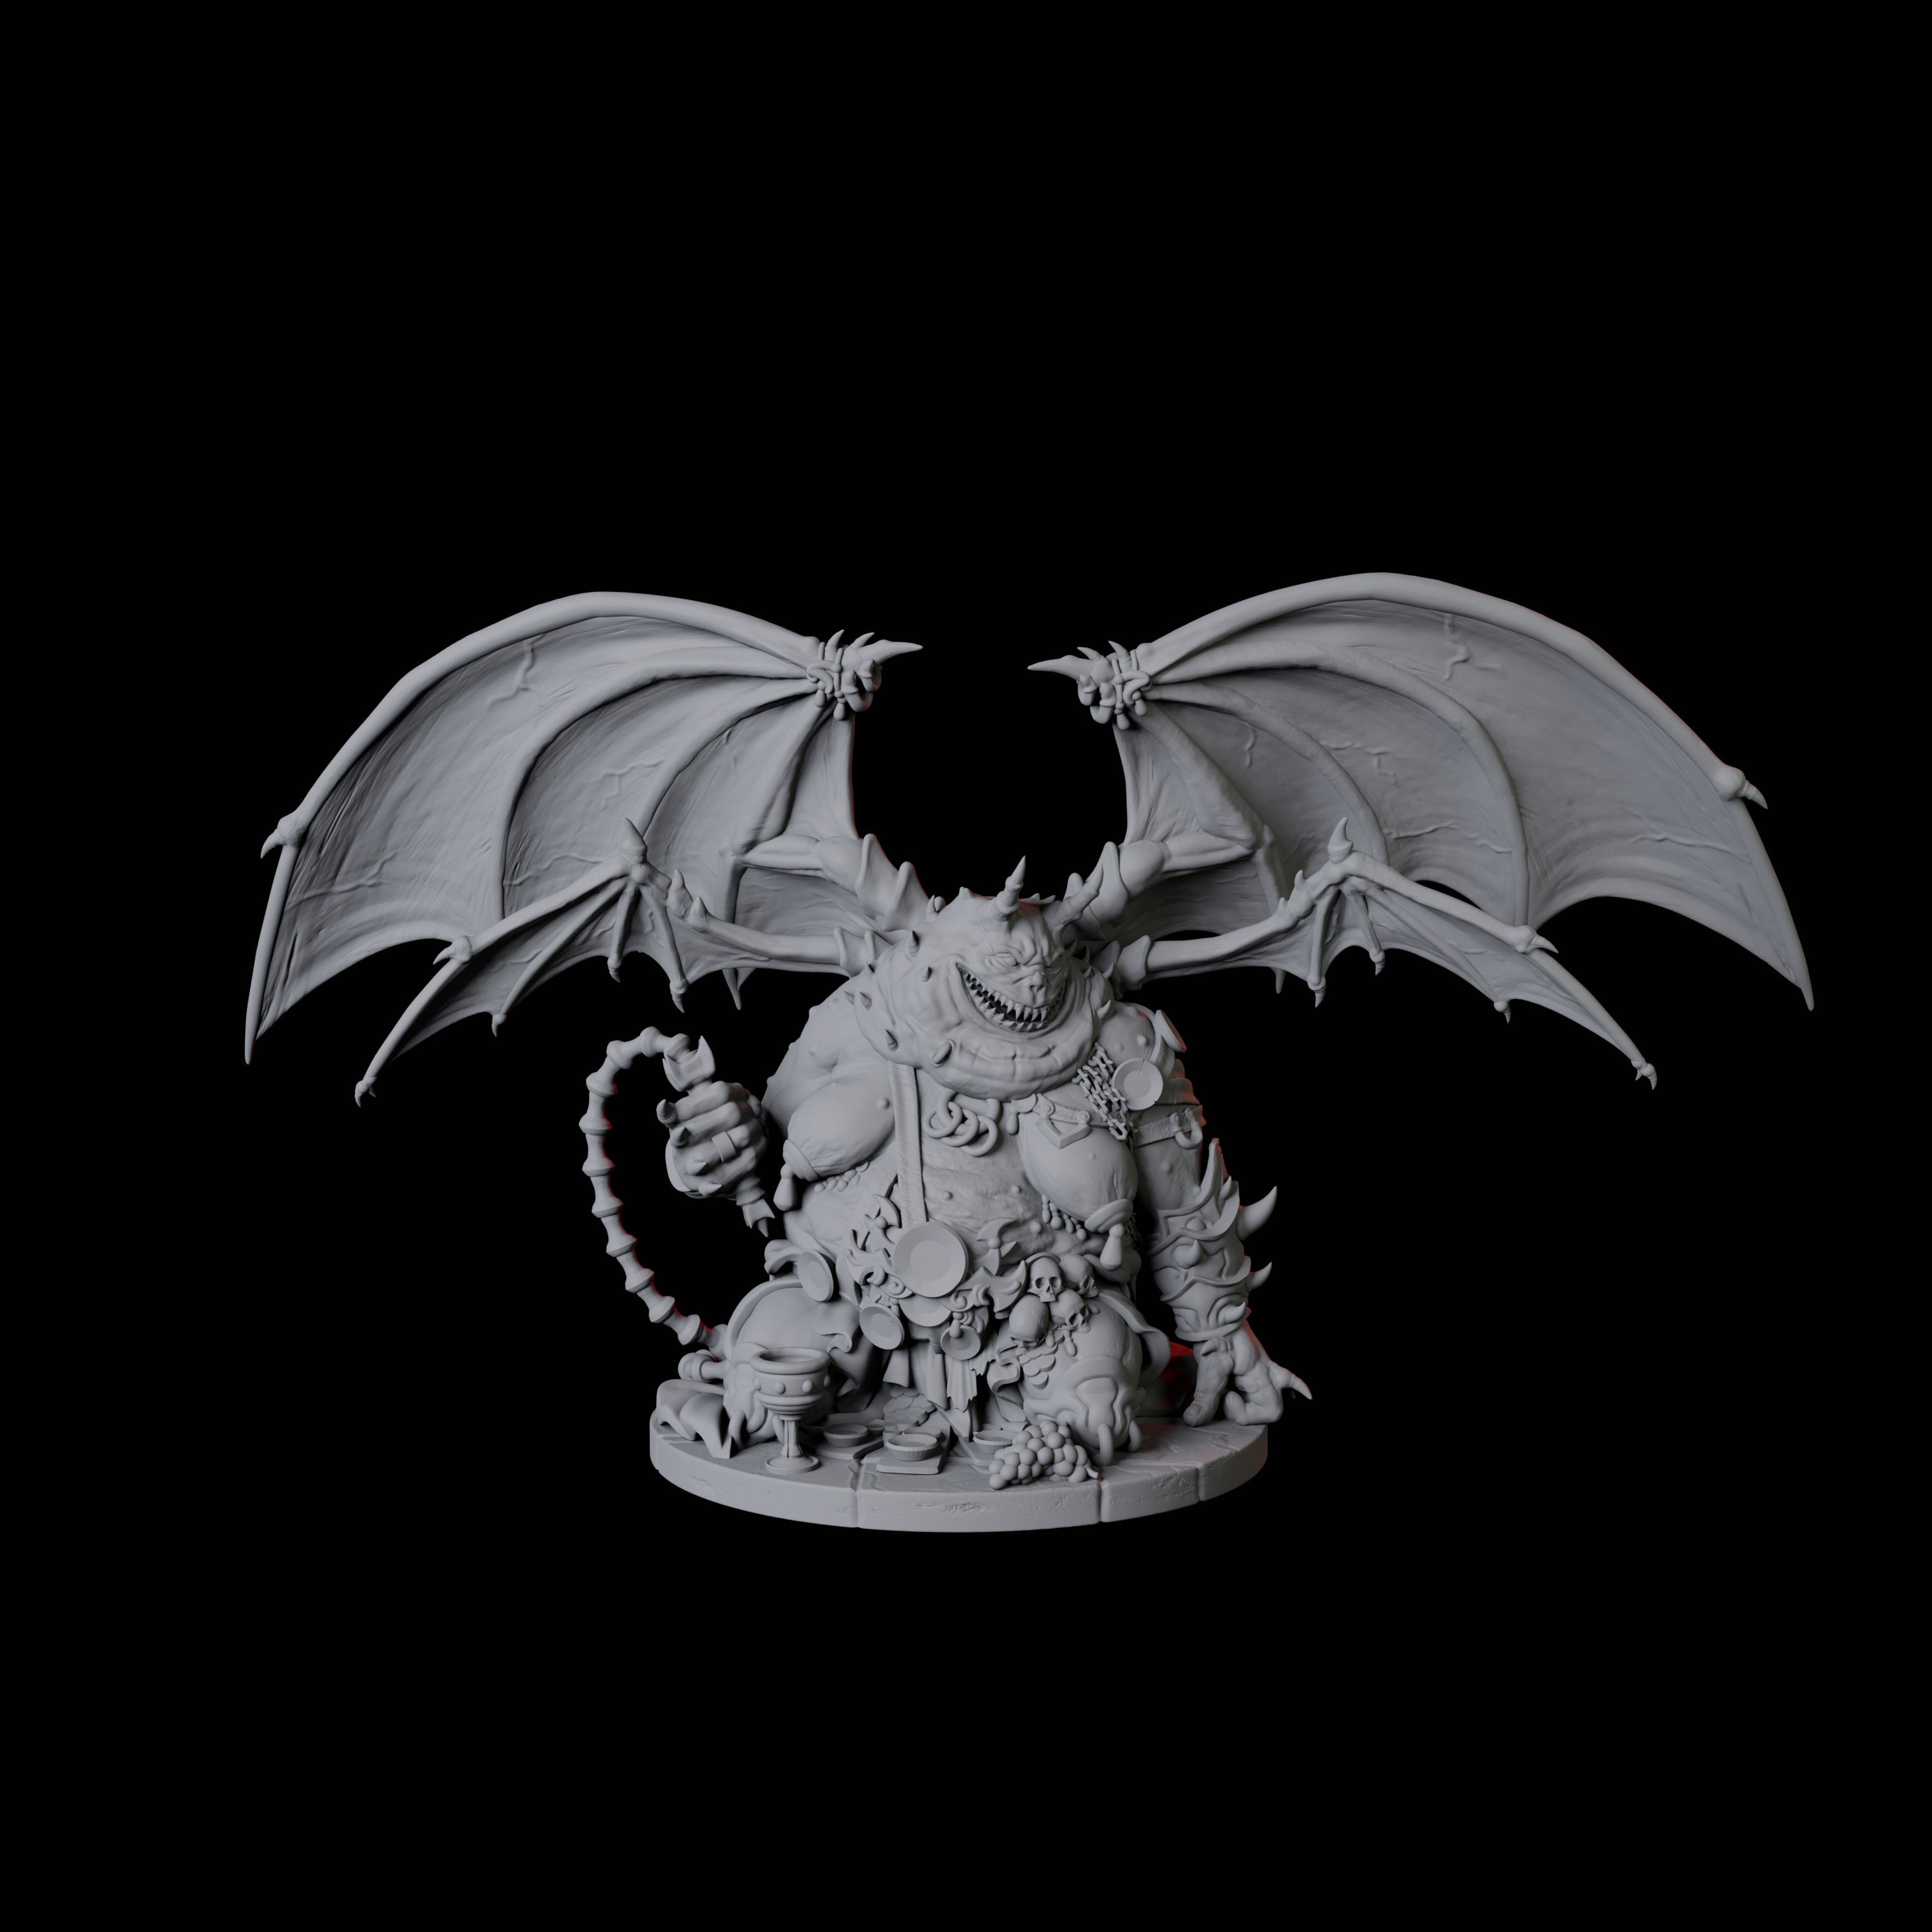 Two Grotesque Dretch Demons Miniature for Dungeons and Dragons, Pathfinder or other TTRPGs